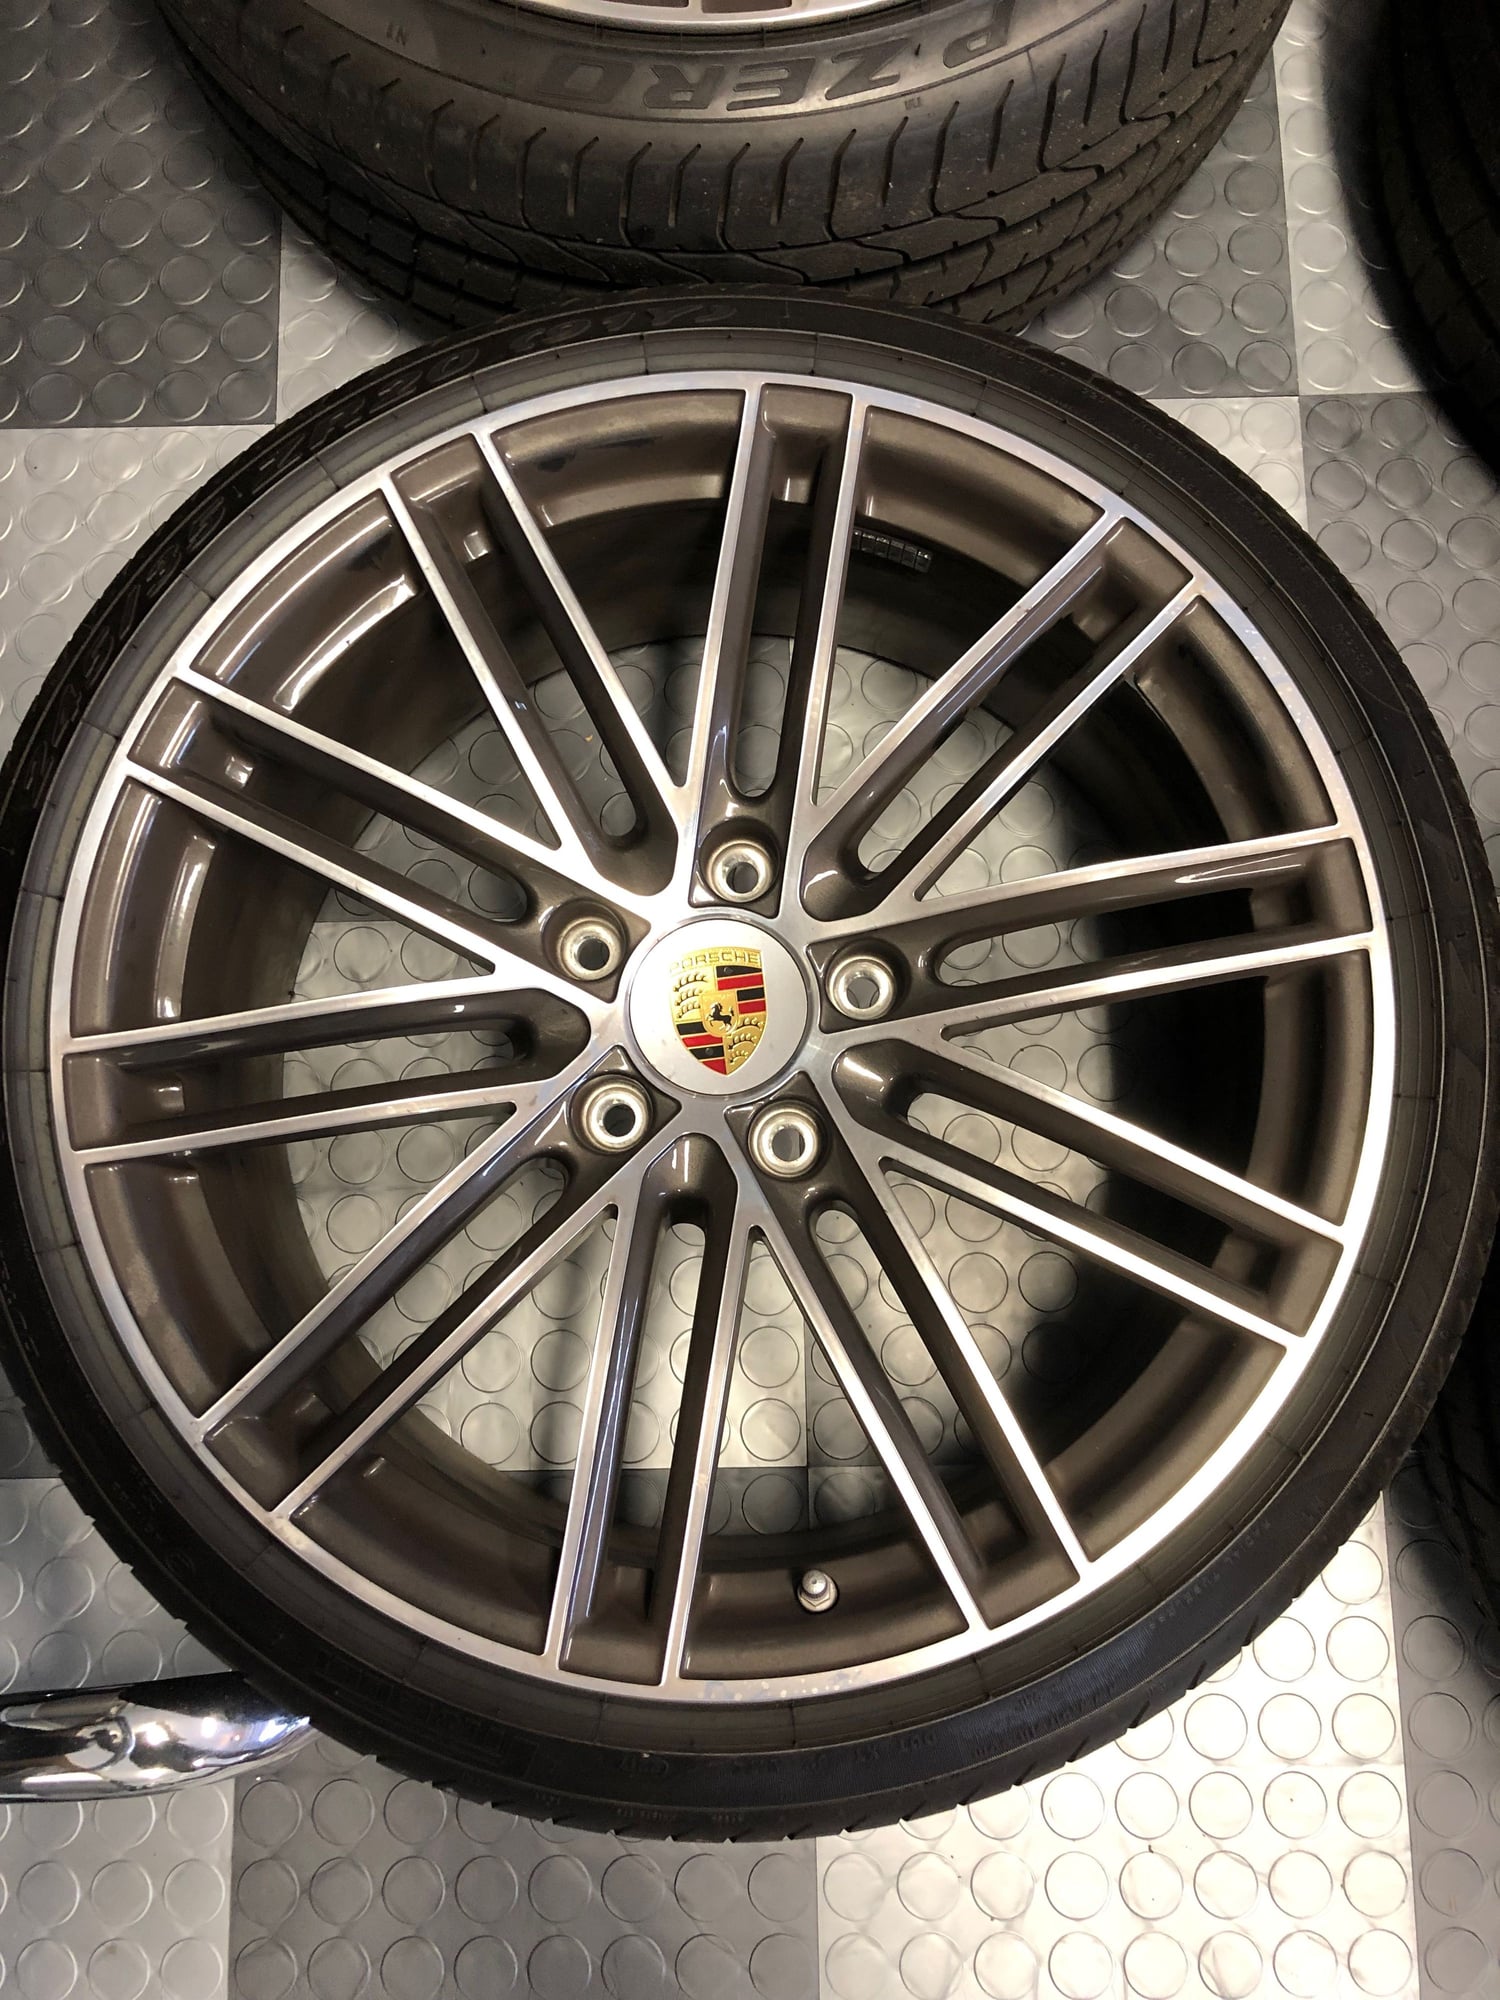 Wheels and Tires/Axles - OEM 991 Porsche Turbo Wheels, Tires, TPMS and Center Caps 710 Miles - Used - 2014 to 2019 Porsche 911 - Davie, FL 33330, United States